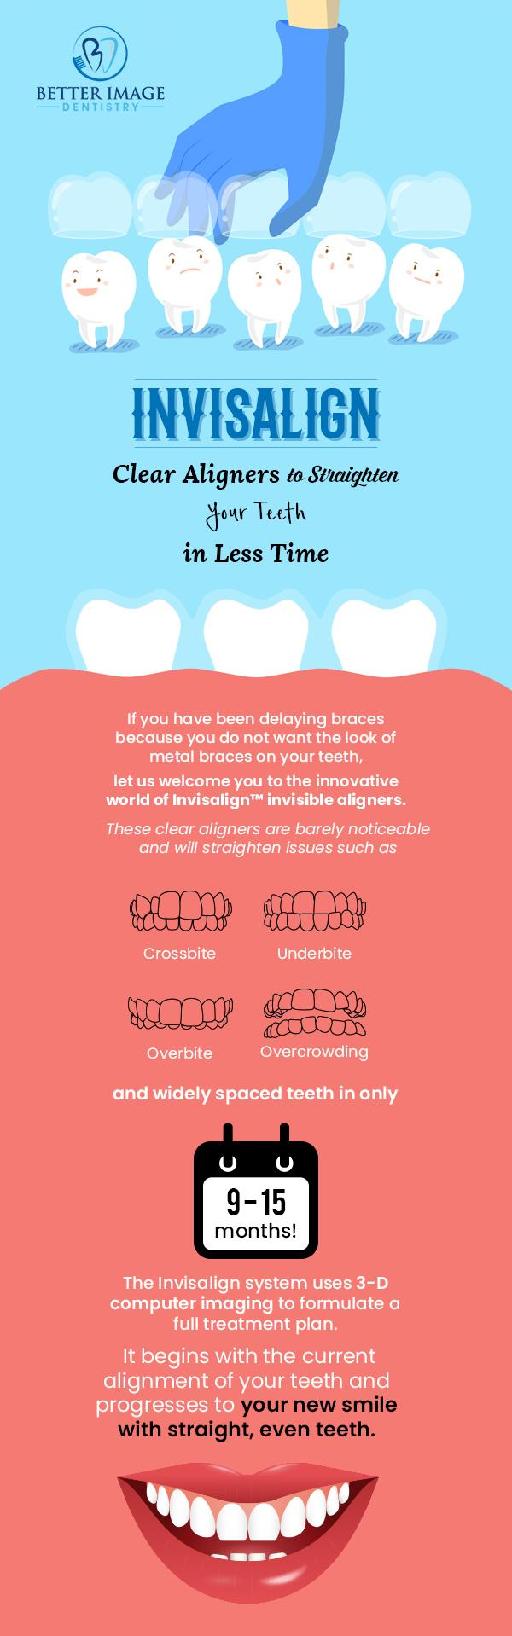 Get Straight Teeth in Less Time with Invisalign Treatment